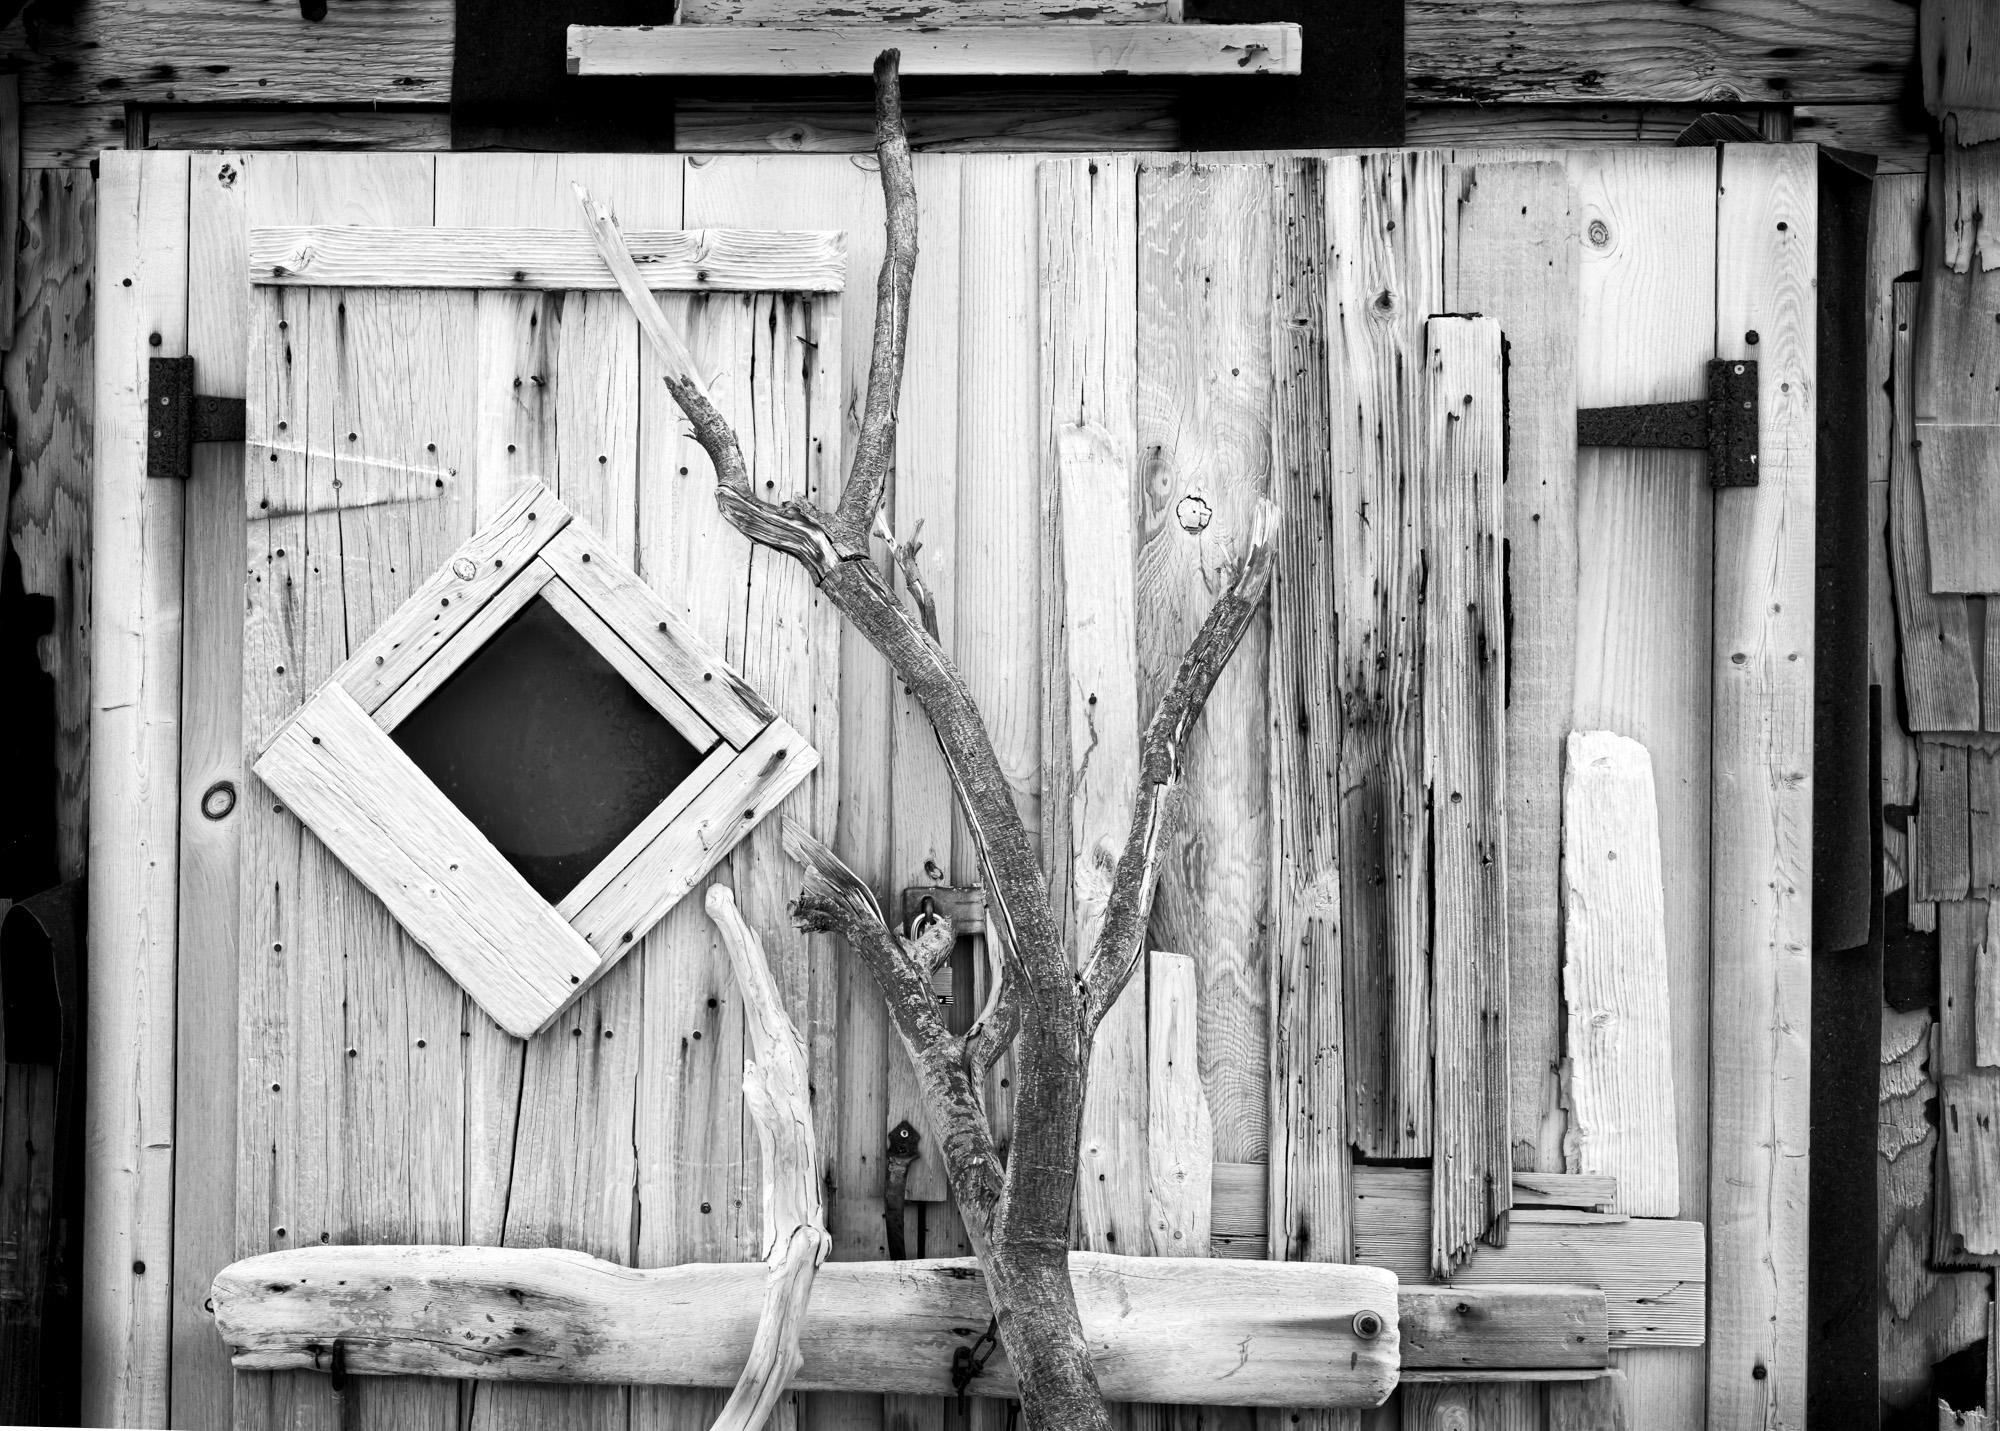 Limited Edition Black and White Photograph Cape Cod "Dune Shack Door" 2020